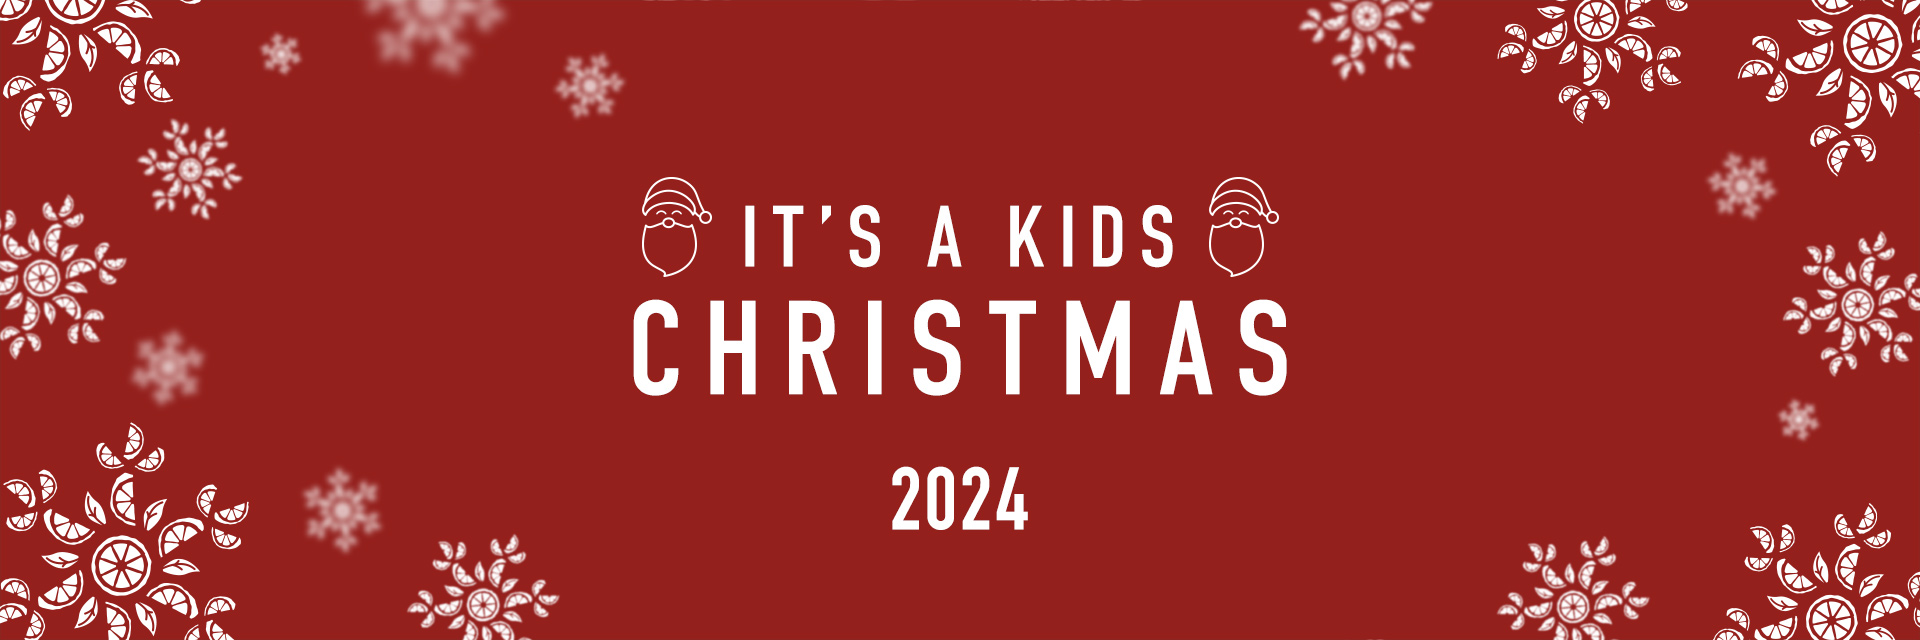 Kids Christmas Menu 2024 at The Sovereign Harbour